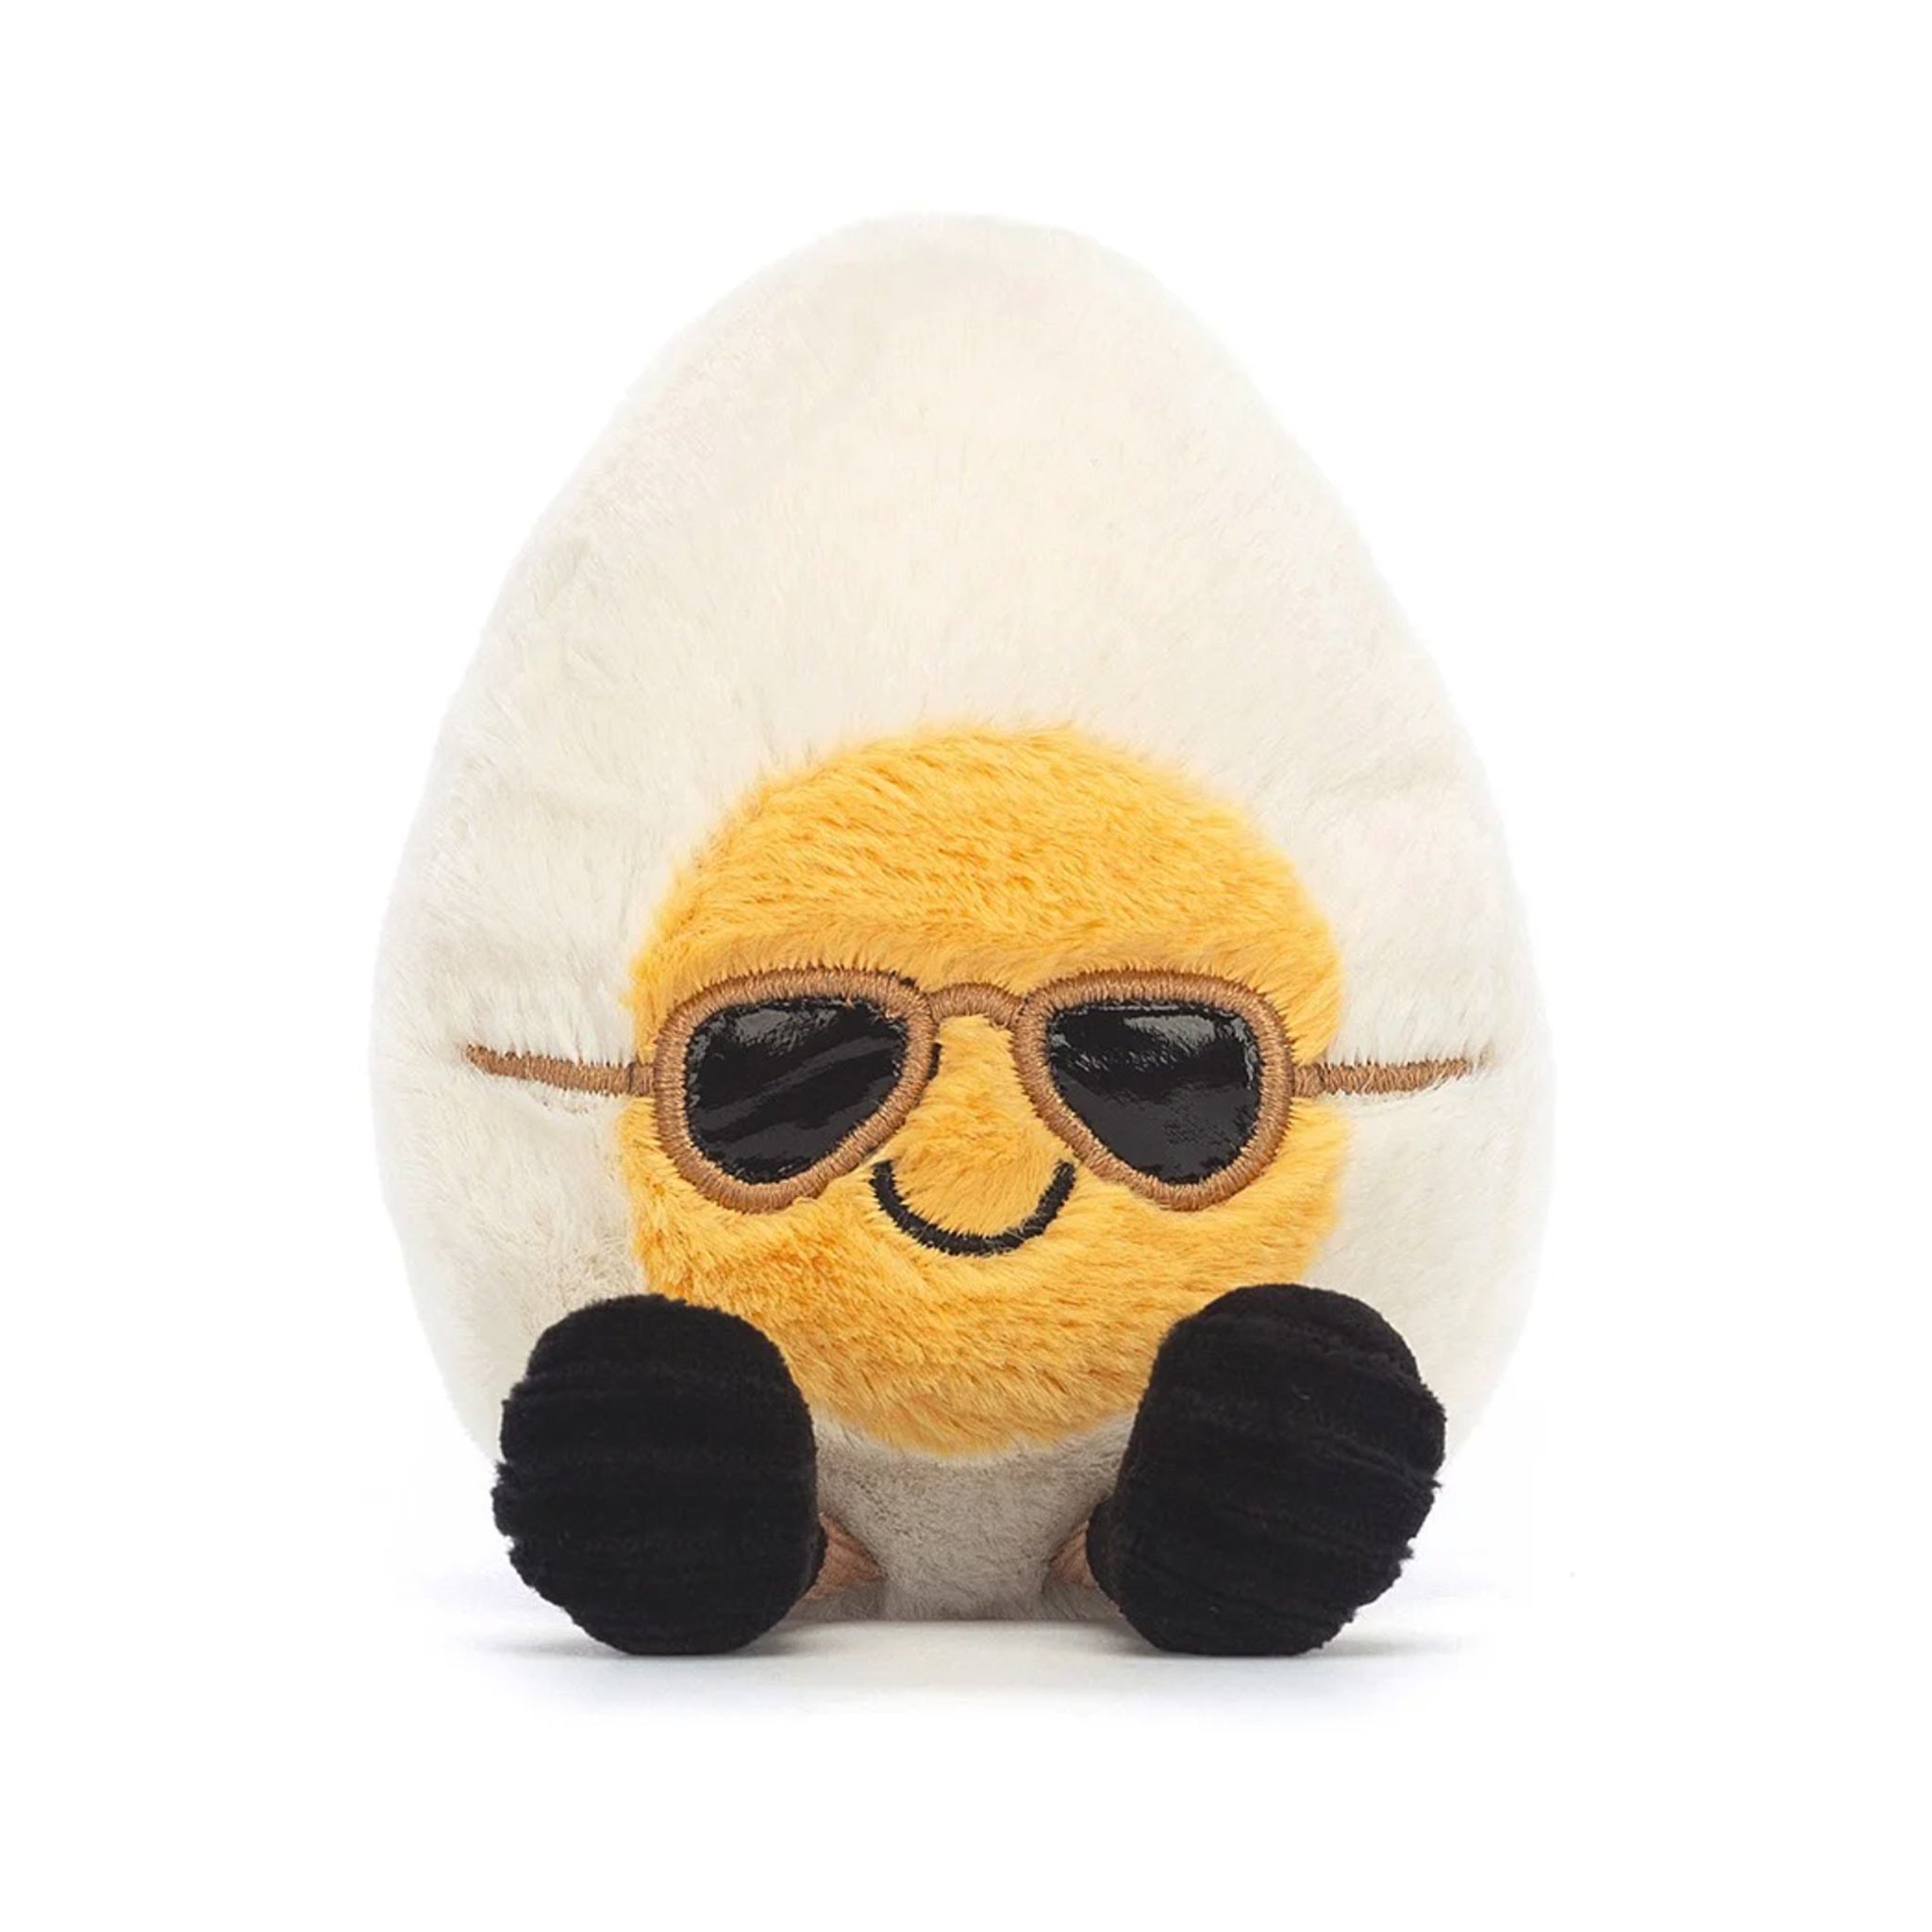 On a white background is a stuffed toy in the shape of a hard boiled egg with sunglasses on and small legs and feet. 